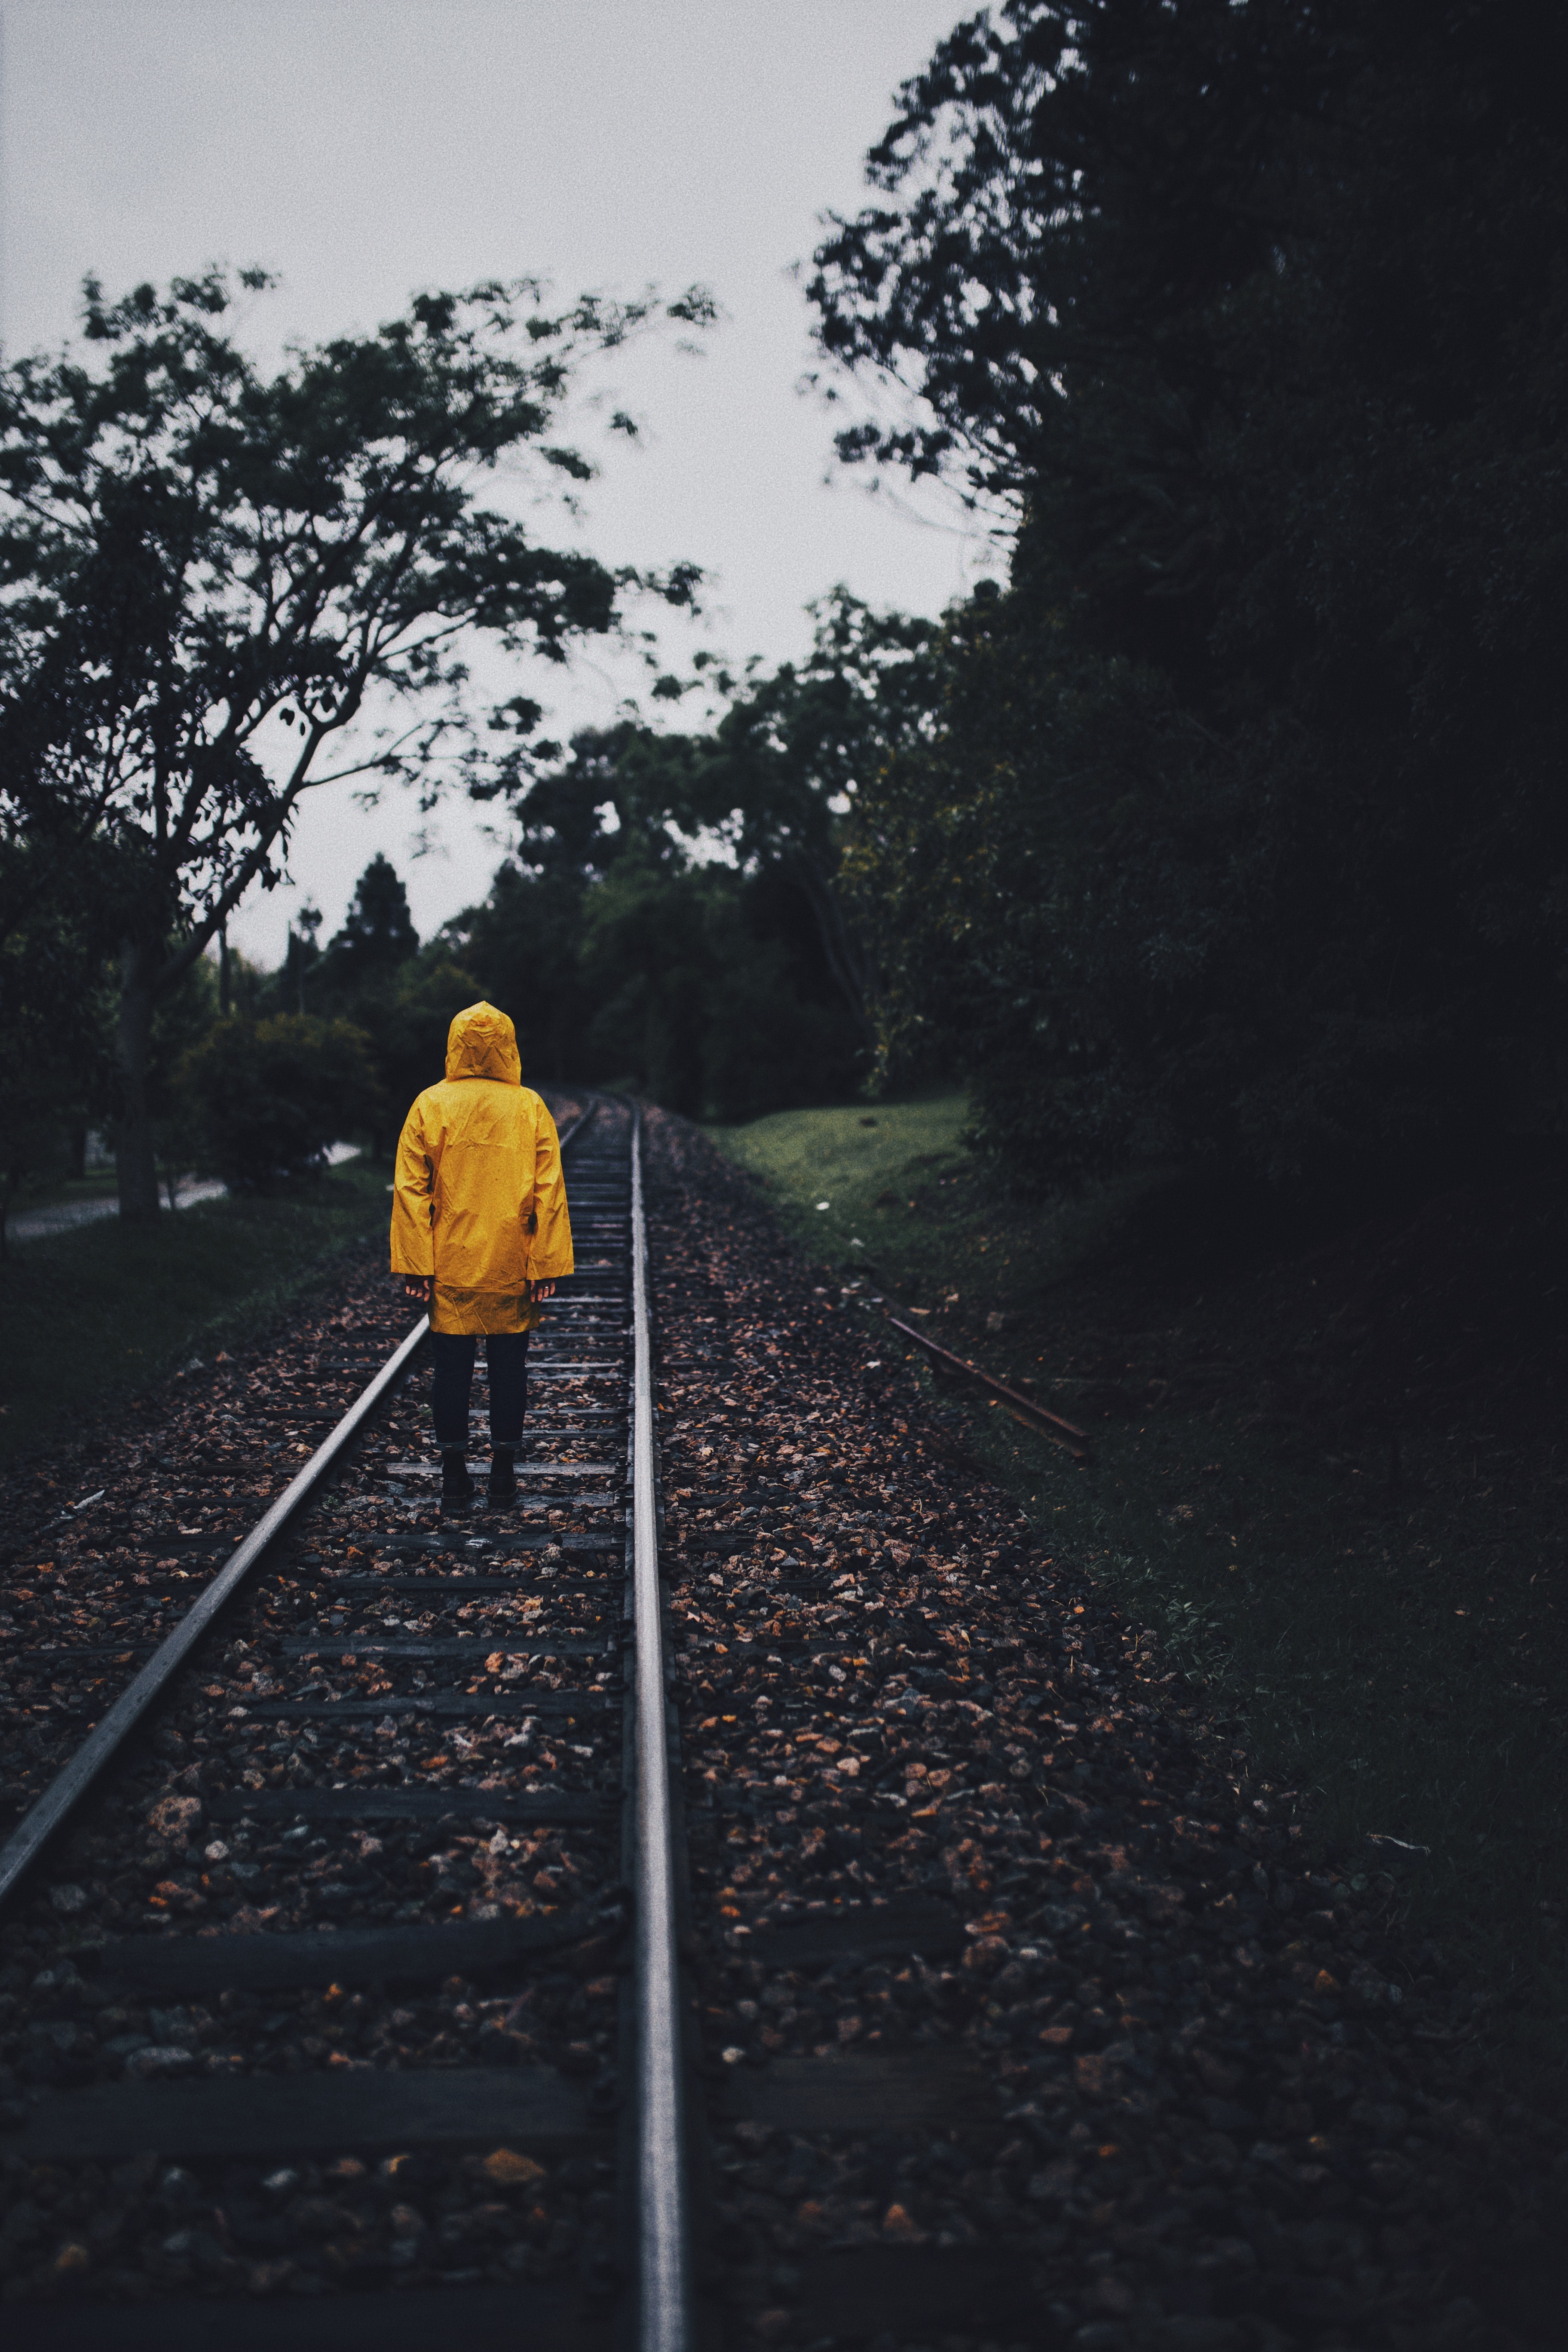 New Lock Screen Wallpapers alone, autumn, yellow, miscellanea, miscellaneous, human, person, railway, lonely, cloak